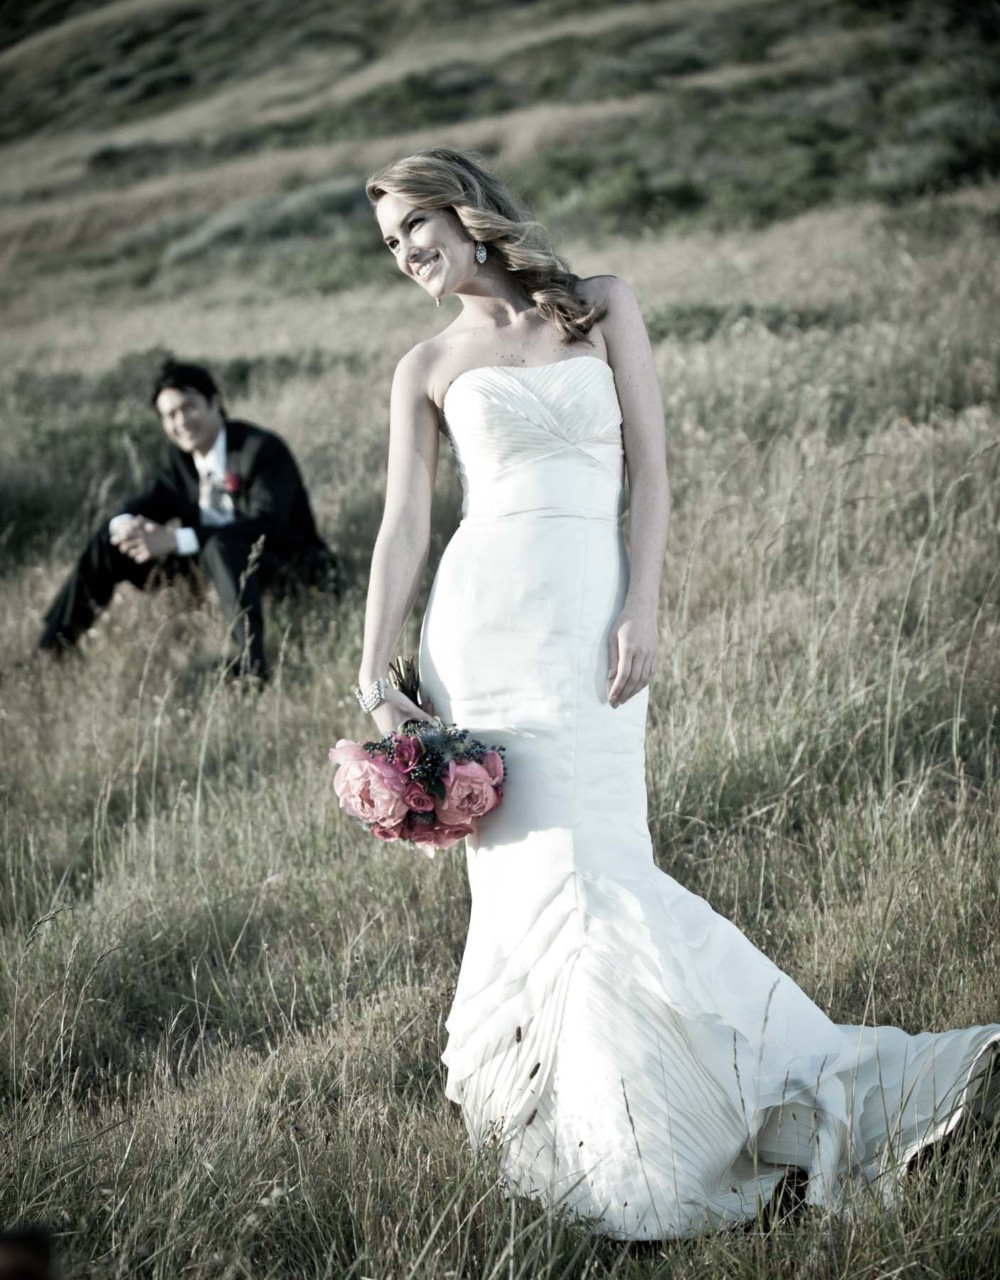 Looking for a event wedding photographer in Anchorage?